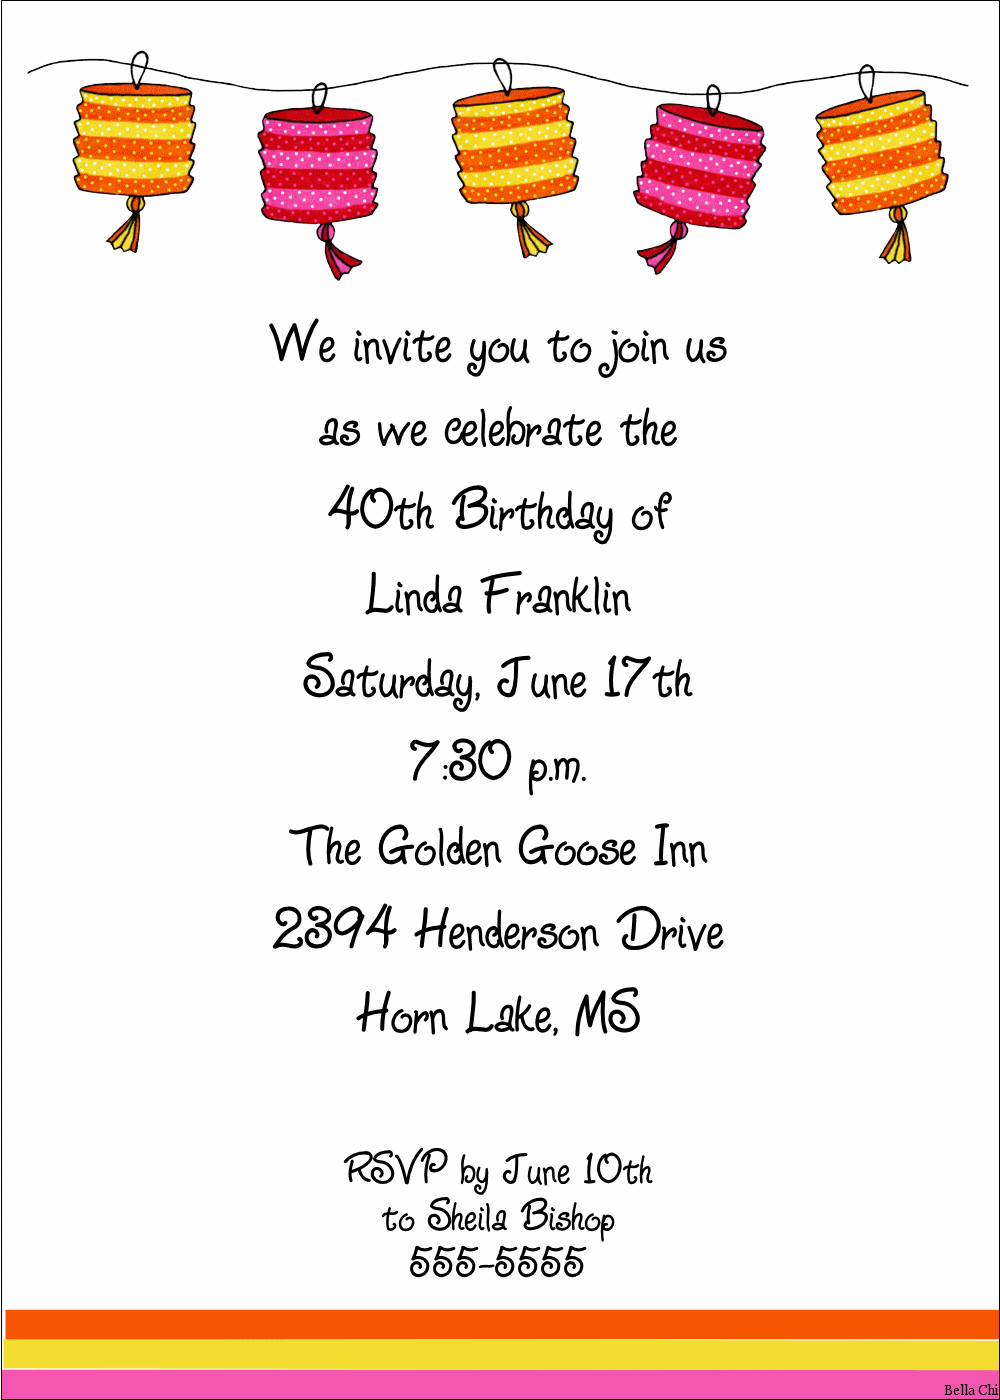 lampion invitations for birthday party for adults